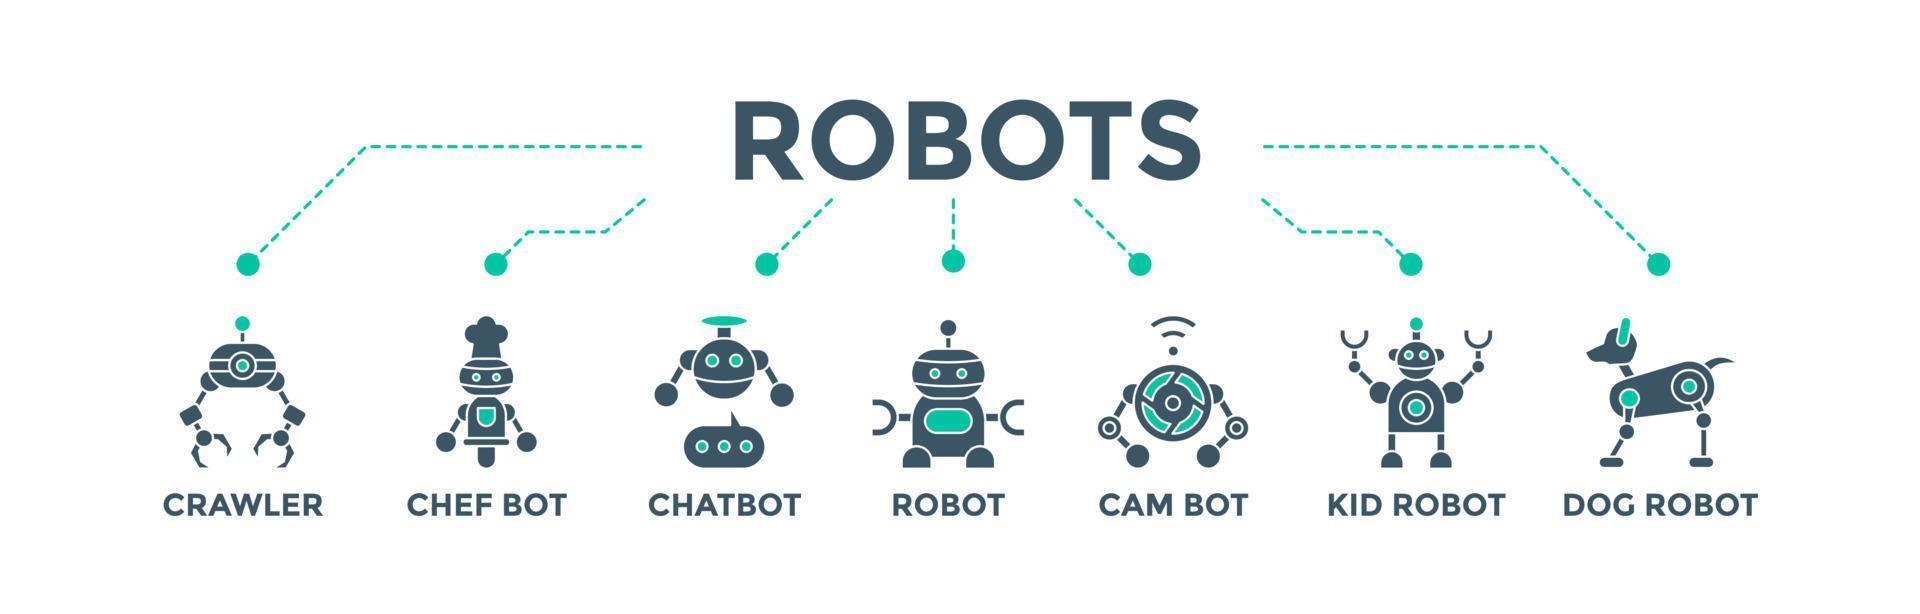 Robots banner web icon vector illustration concept for future robotics technology with an icon of crawler, chef, chatbot, bot, camera, kid and dog robot